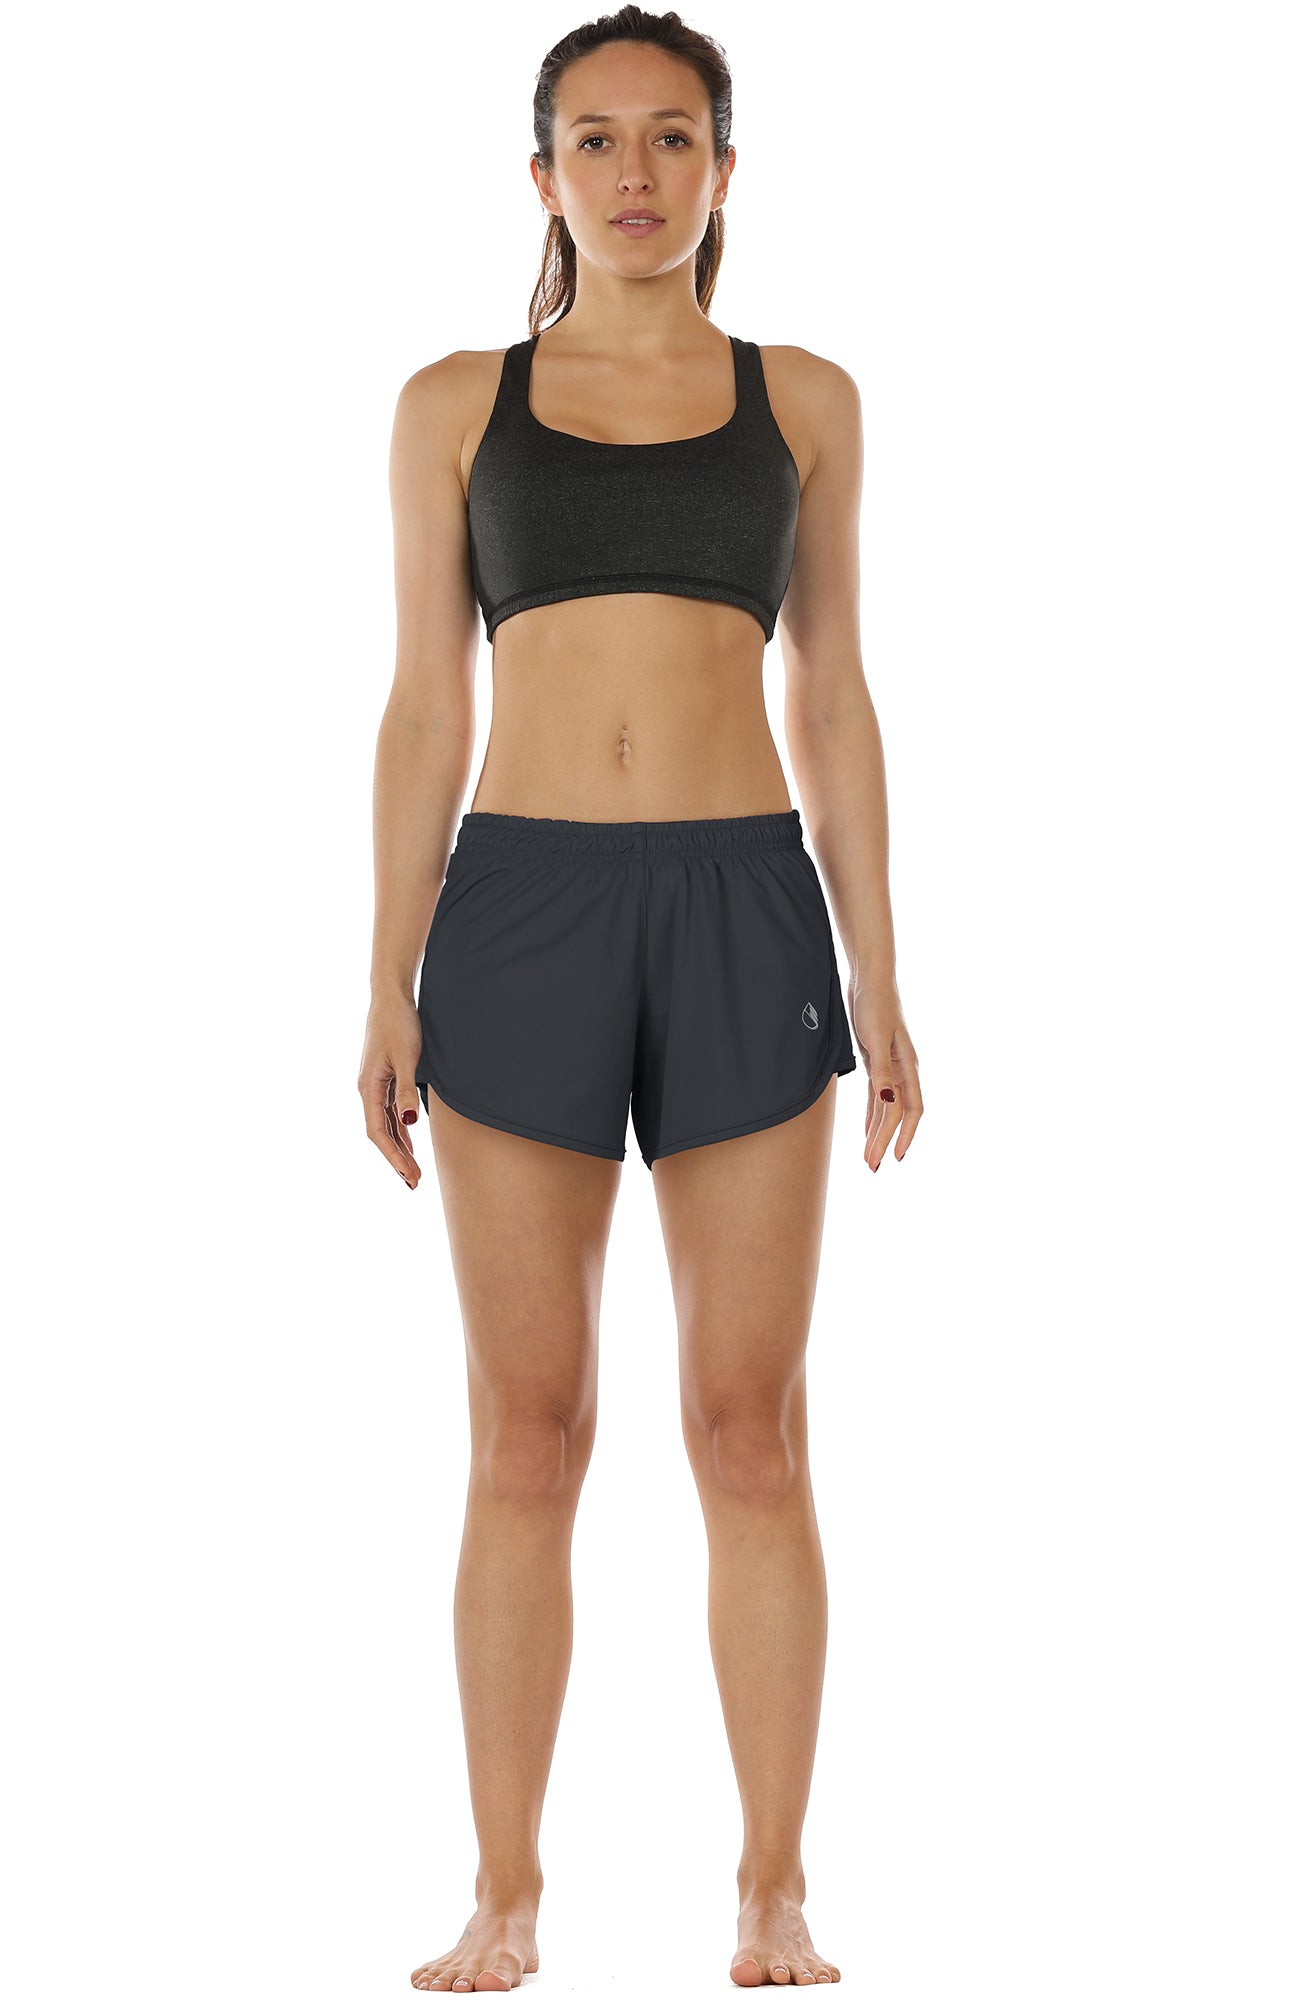 icyzone Workout Shorts Built-in Brief - Women's Gym Exercise